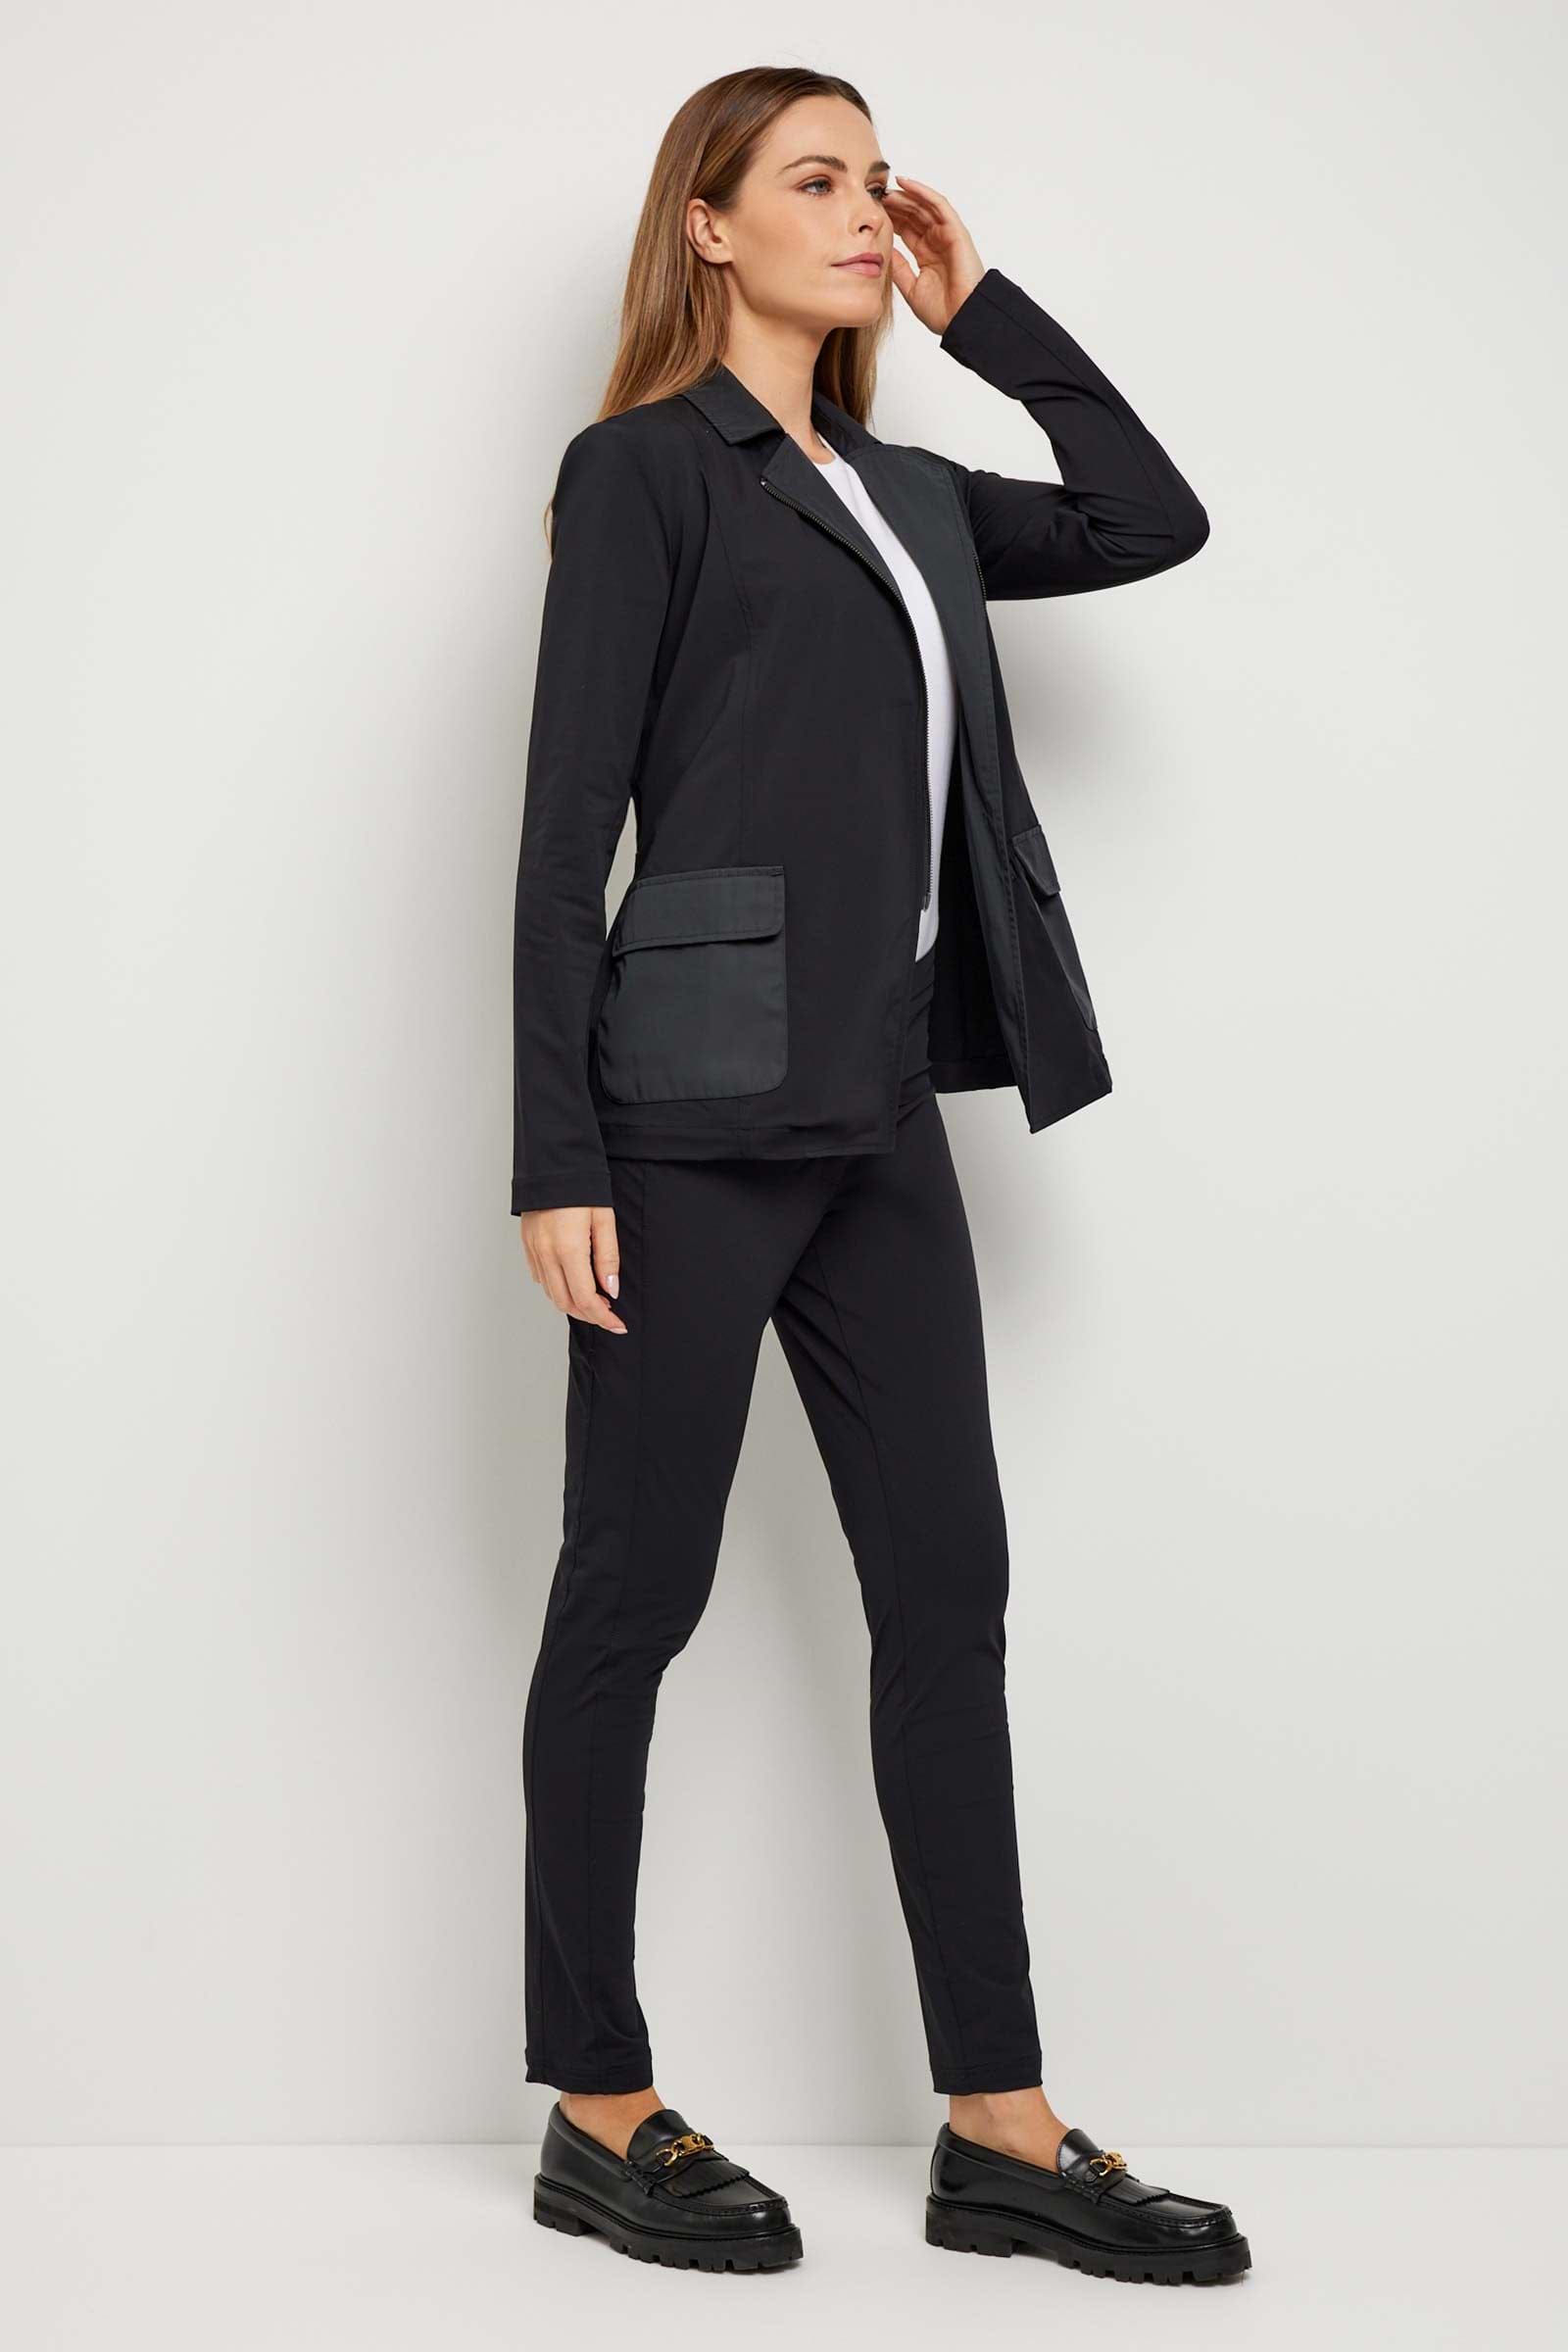 The Best Travel Jacket. Woman Showing the Side Profile of an Allegra Jacket in Black.